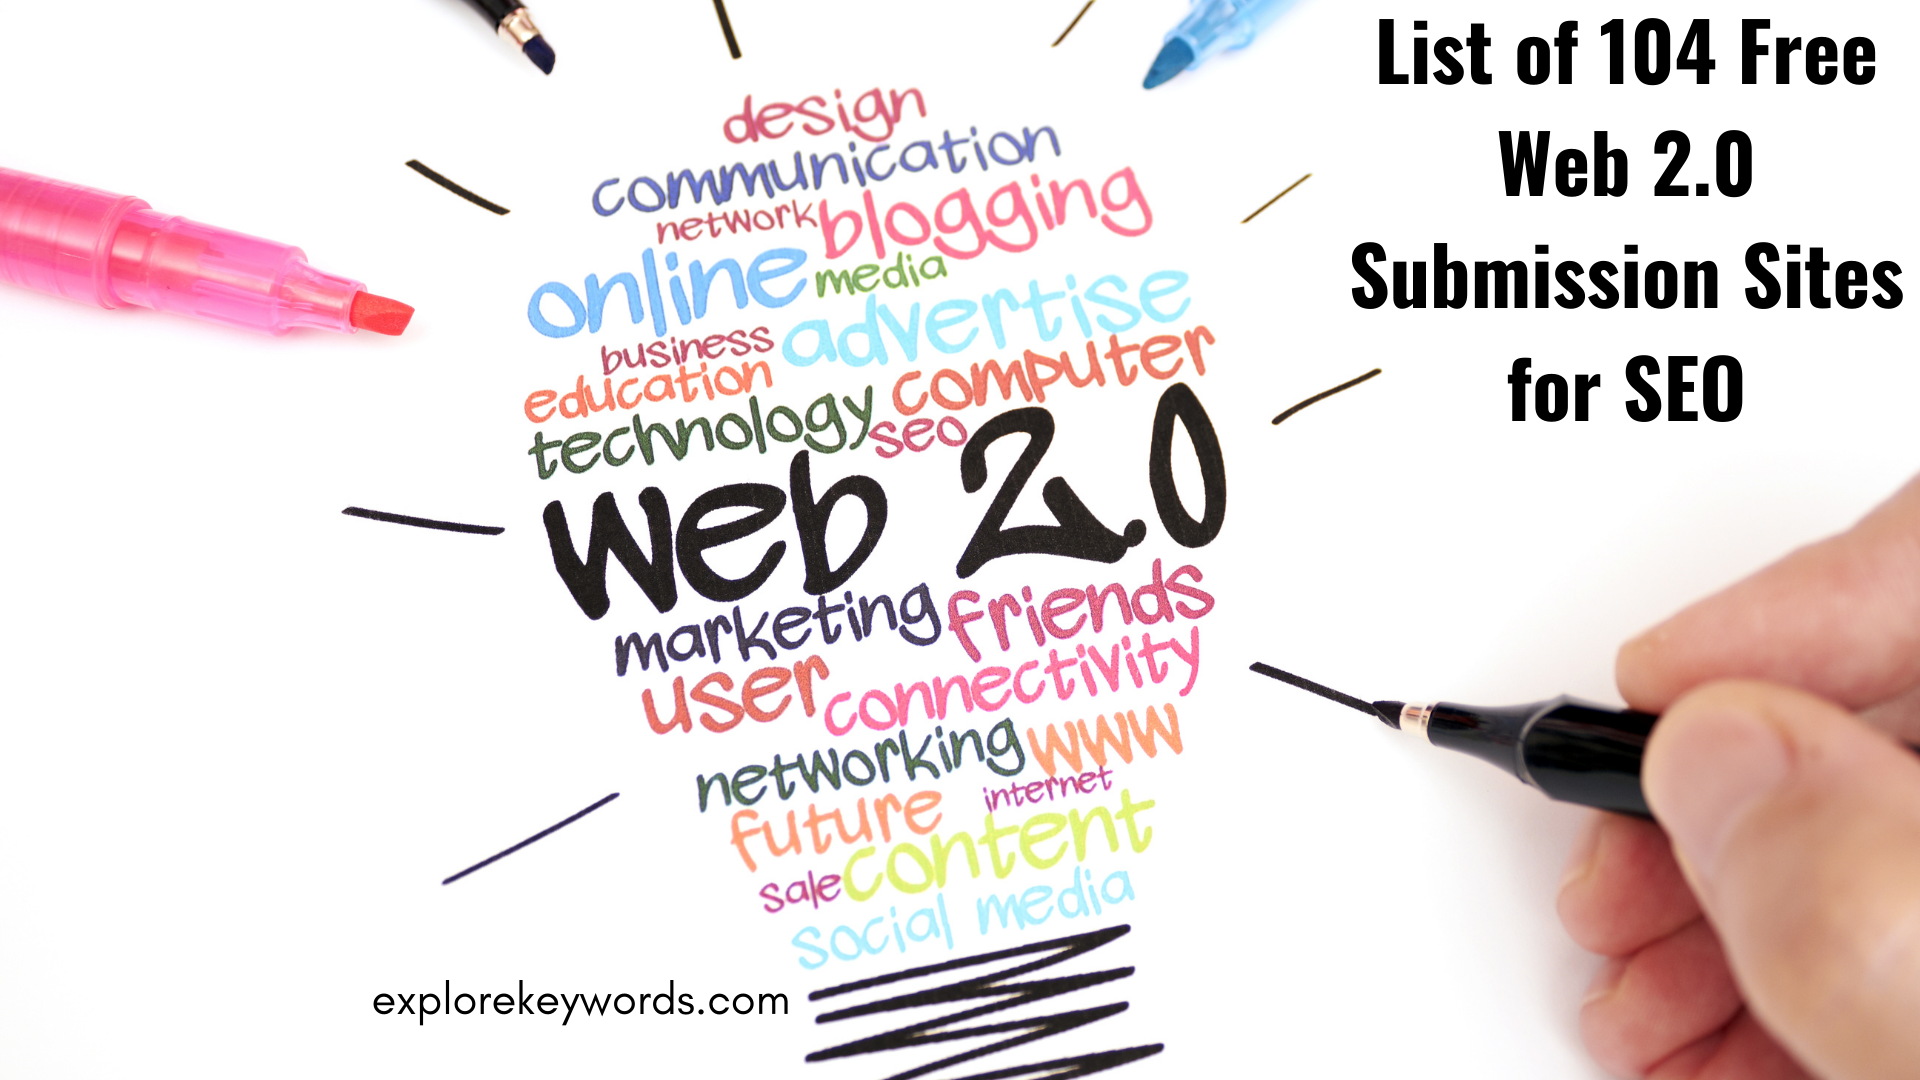 List of 104 Free Web 2.0 Submission Sites for SEO